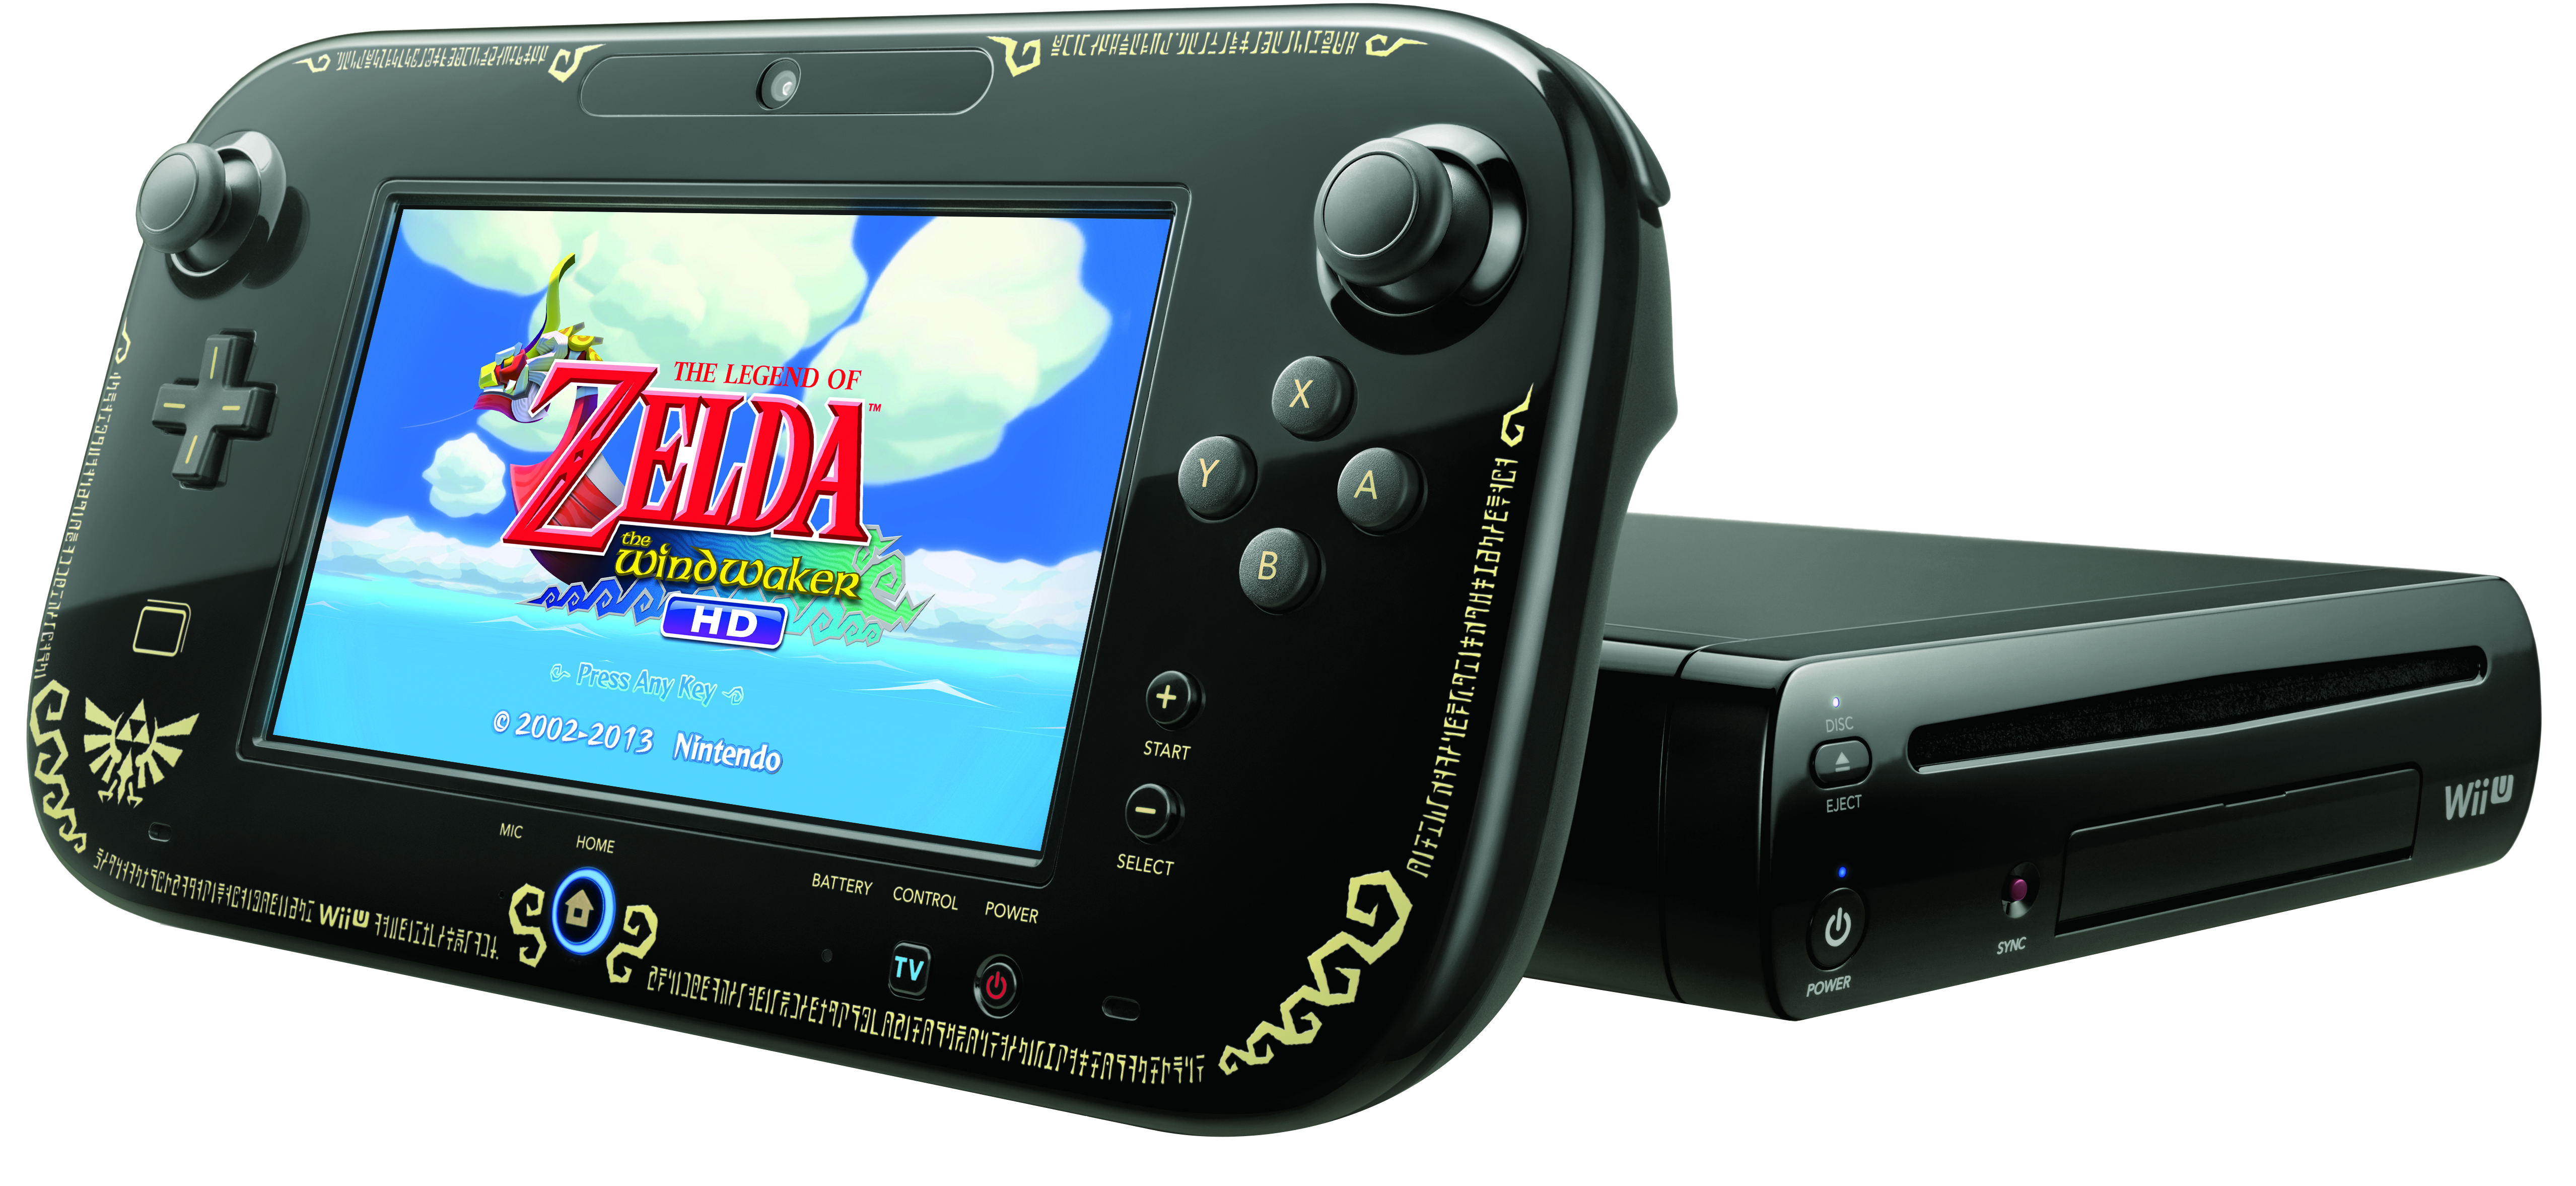 The Legend of Zelda The Wind Waker, Gamecube, Wii U, Switch, 3DS, HD, ROM,  Chaos Edition, Game Guide Unofficial by Guides, Hse 